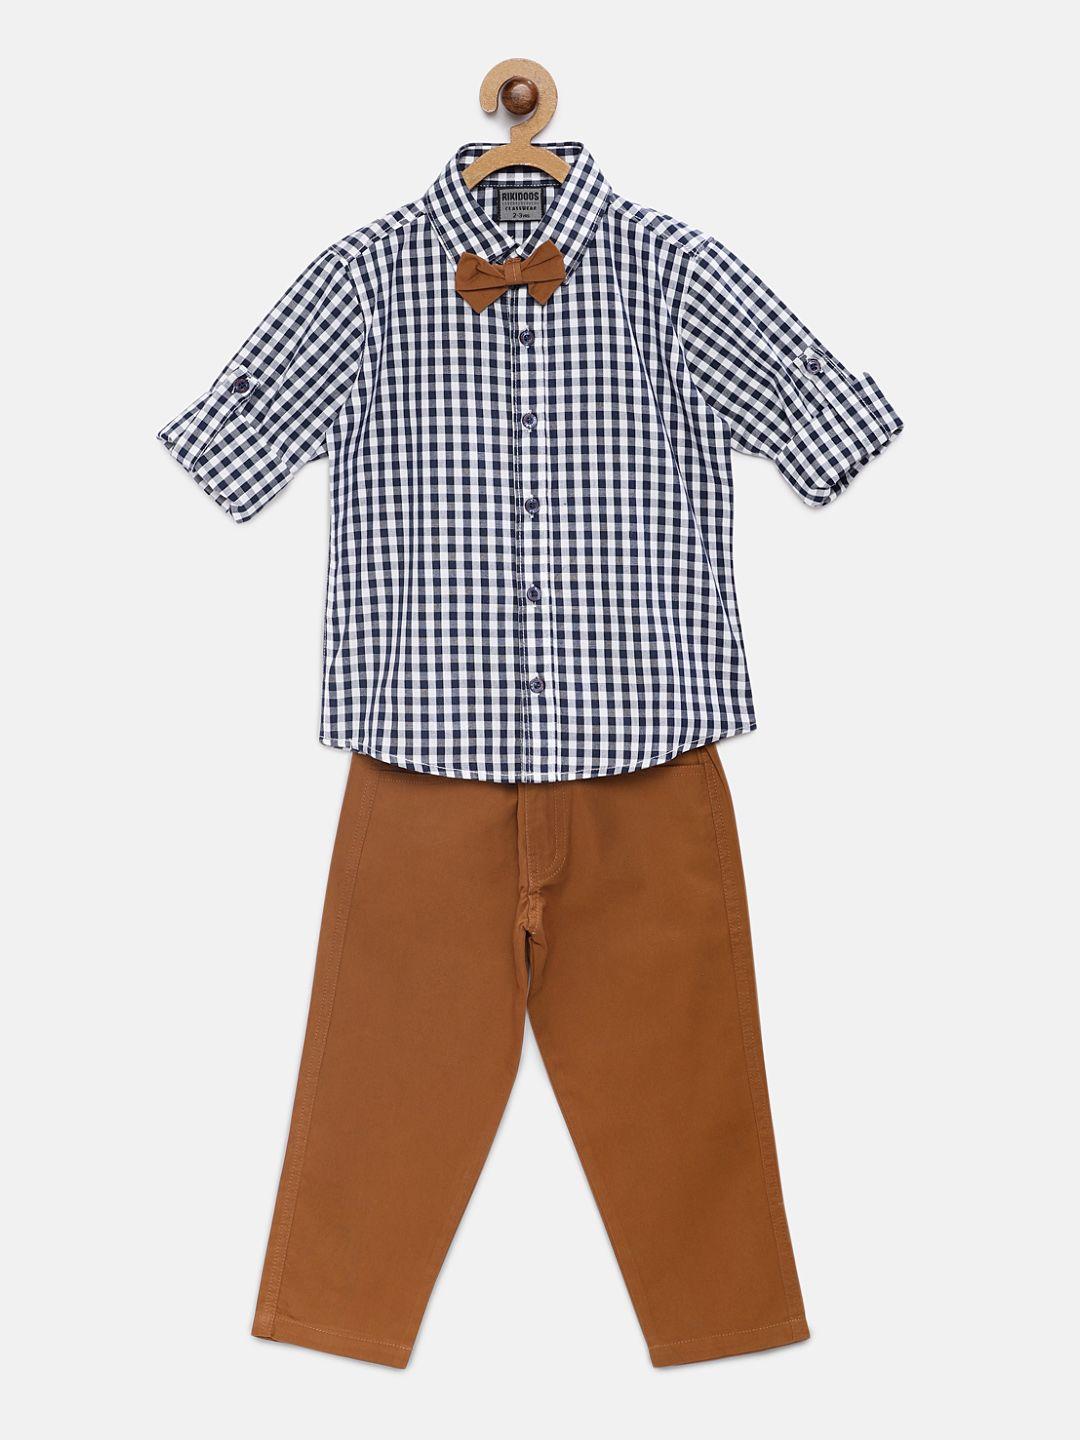 rikidoos-boys-navy-blue-&-brown-checked-shirt-with-trousers